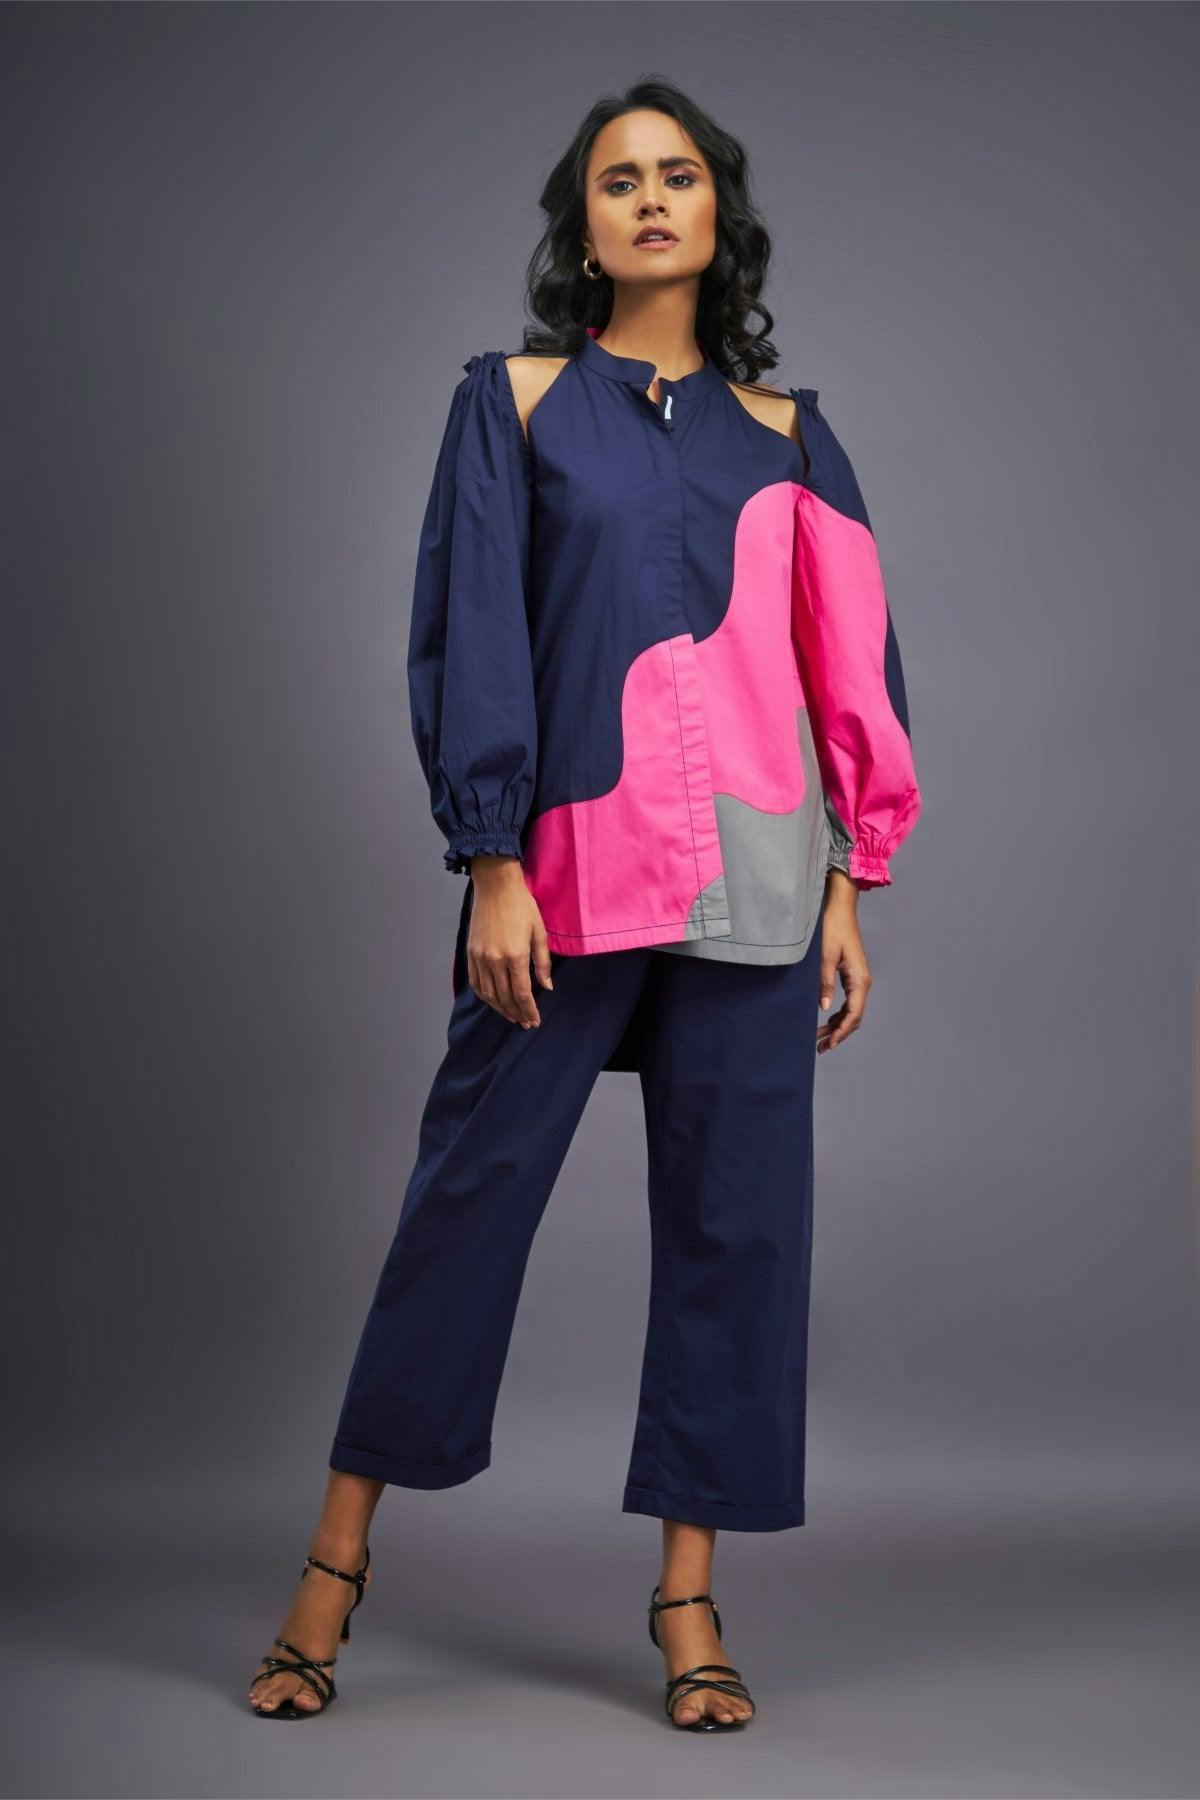 Thumbnail preview #3 for BB-1112-PG-T - Navy Blue Pink Shirt With Shoulder Cut Detail